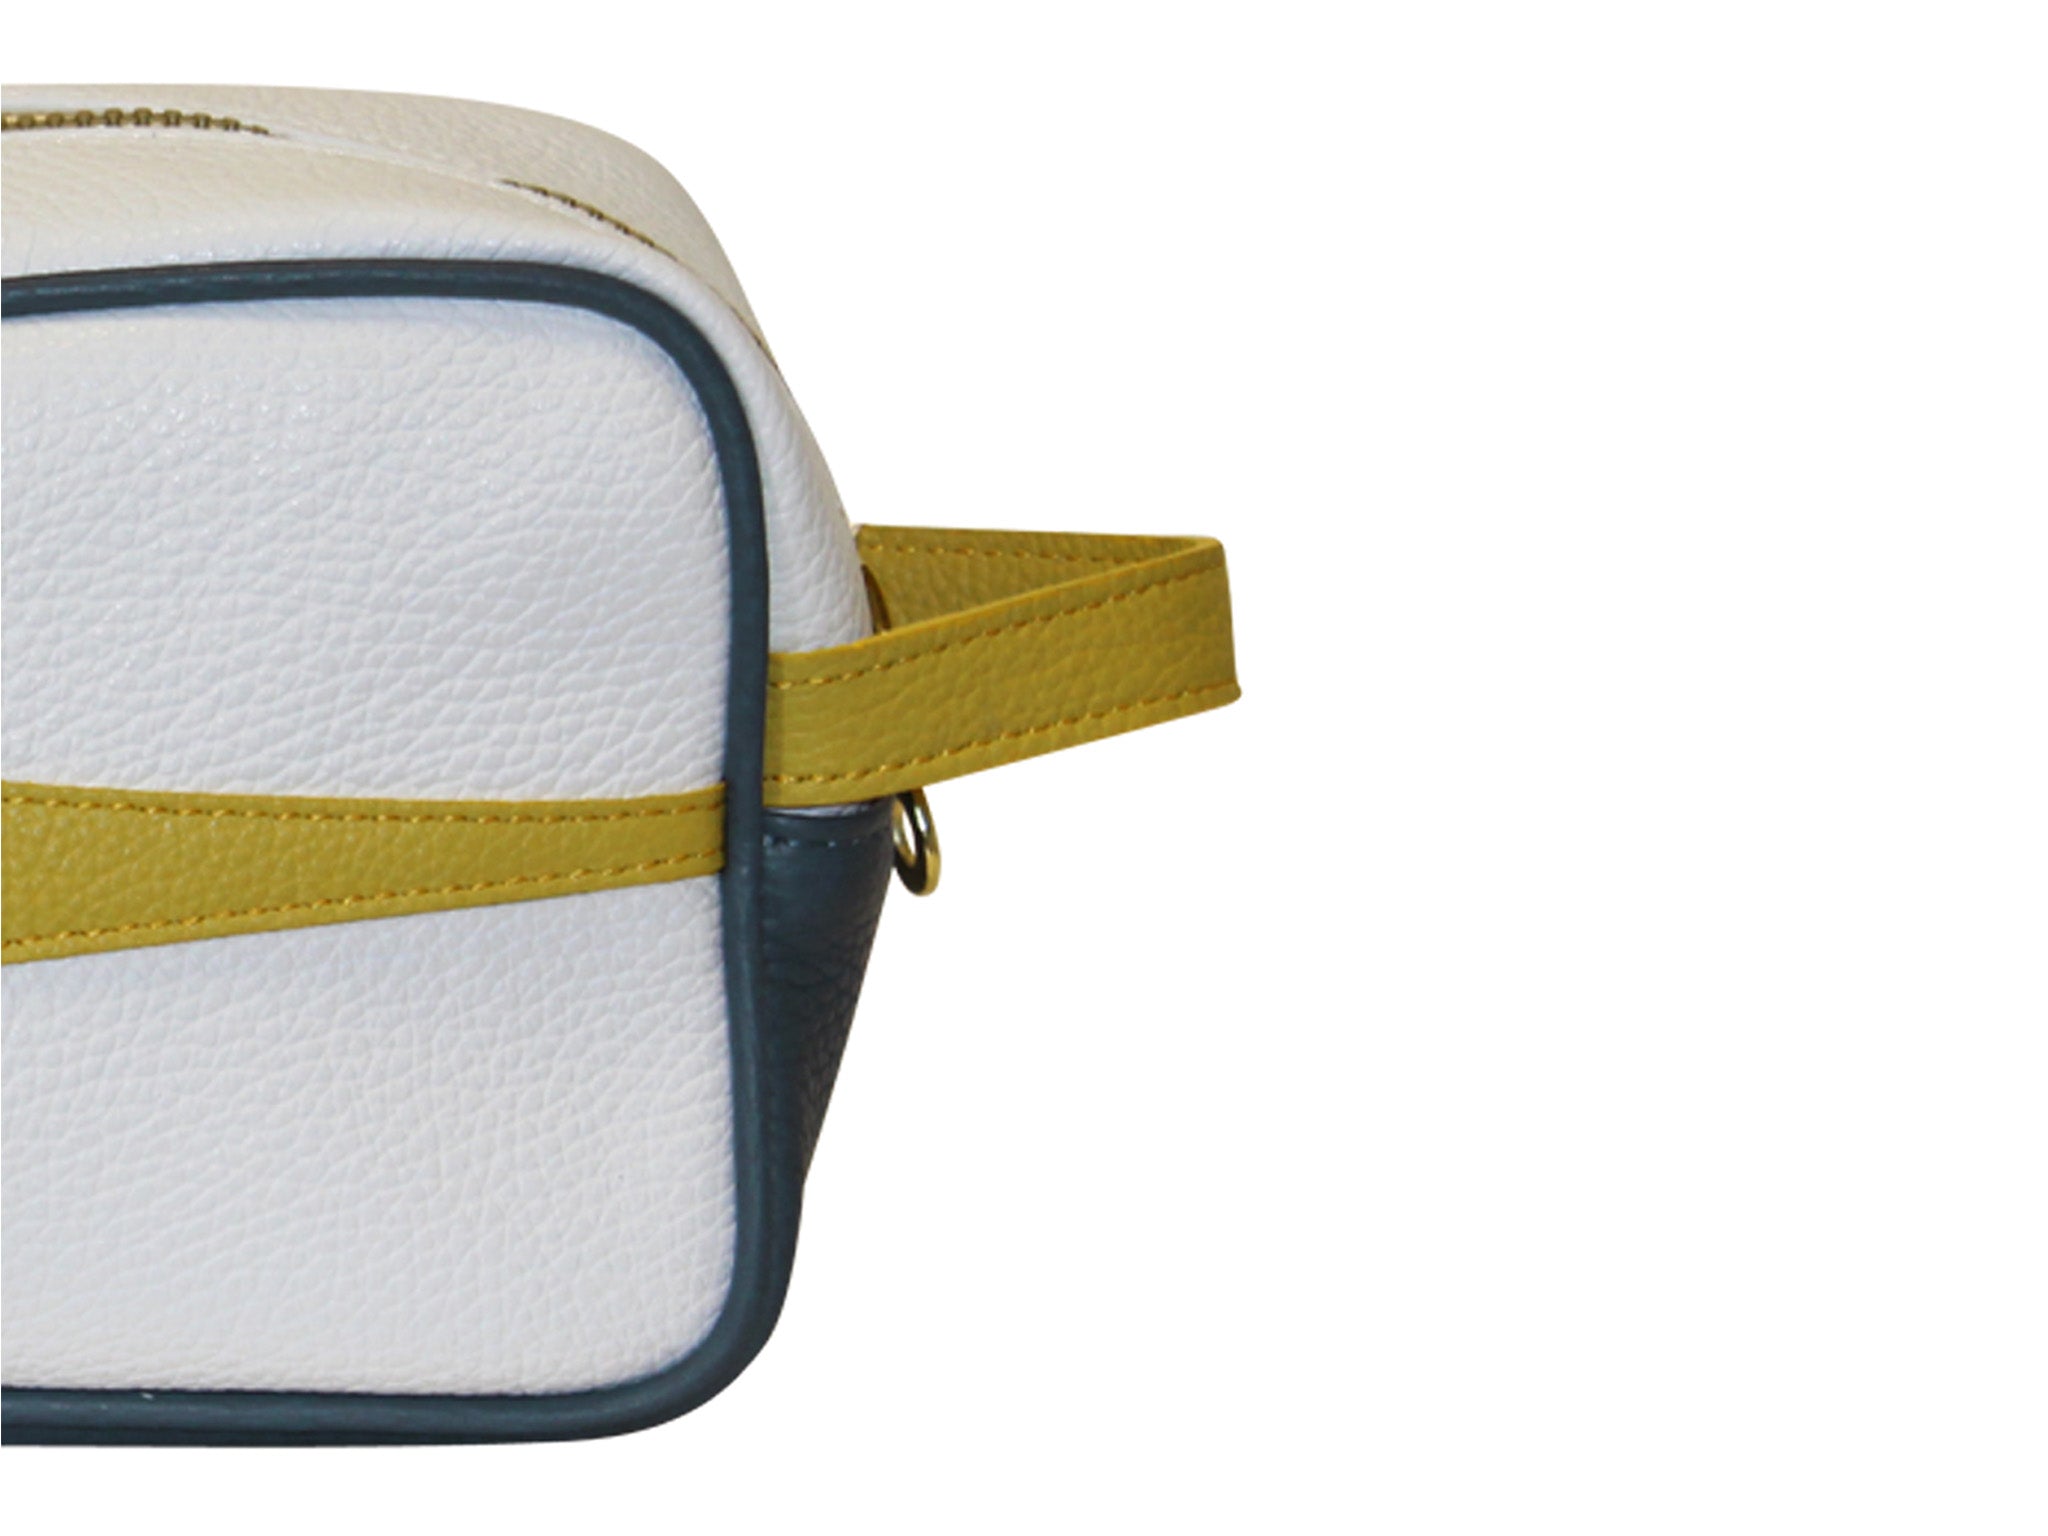 Atletico Accessory Pouch White/Yellow/Navy